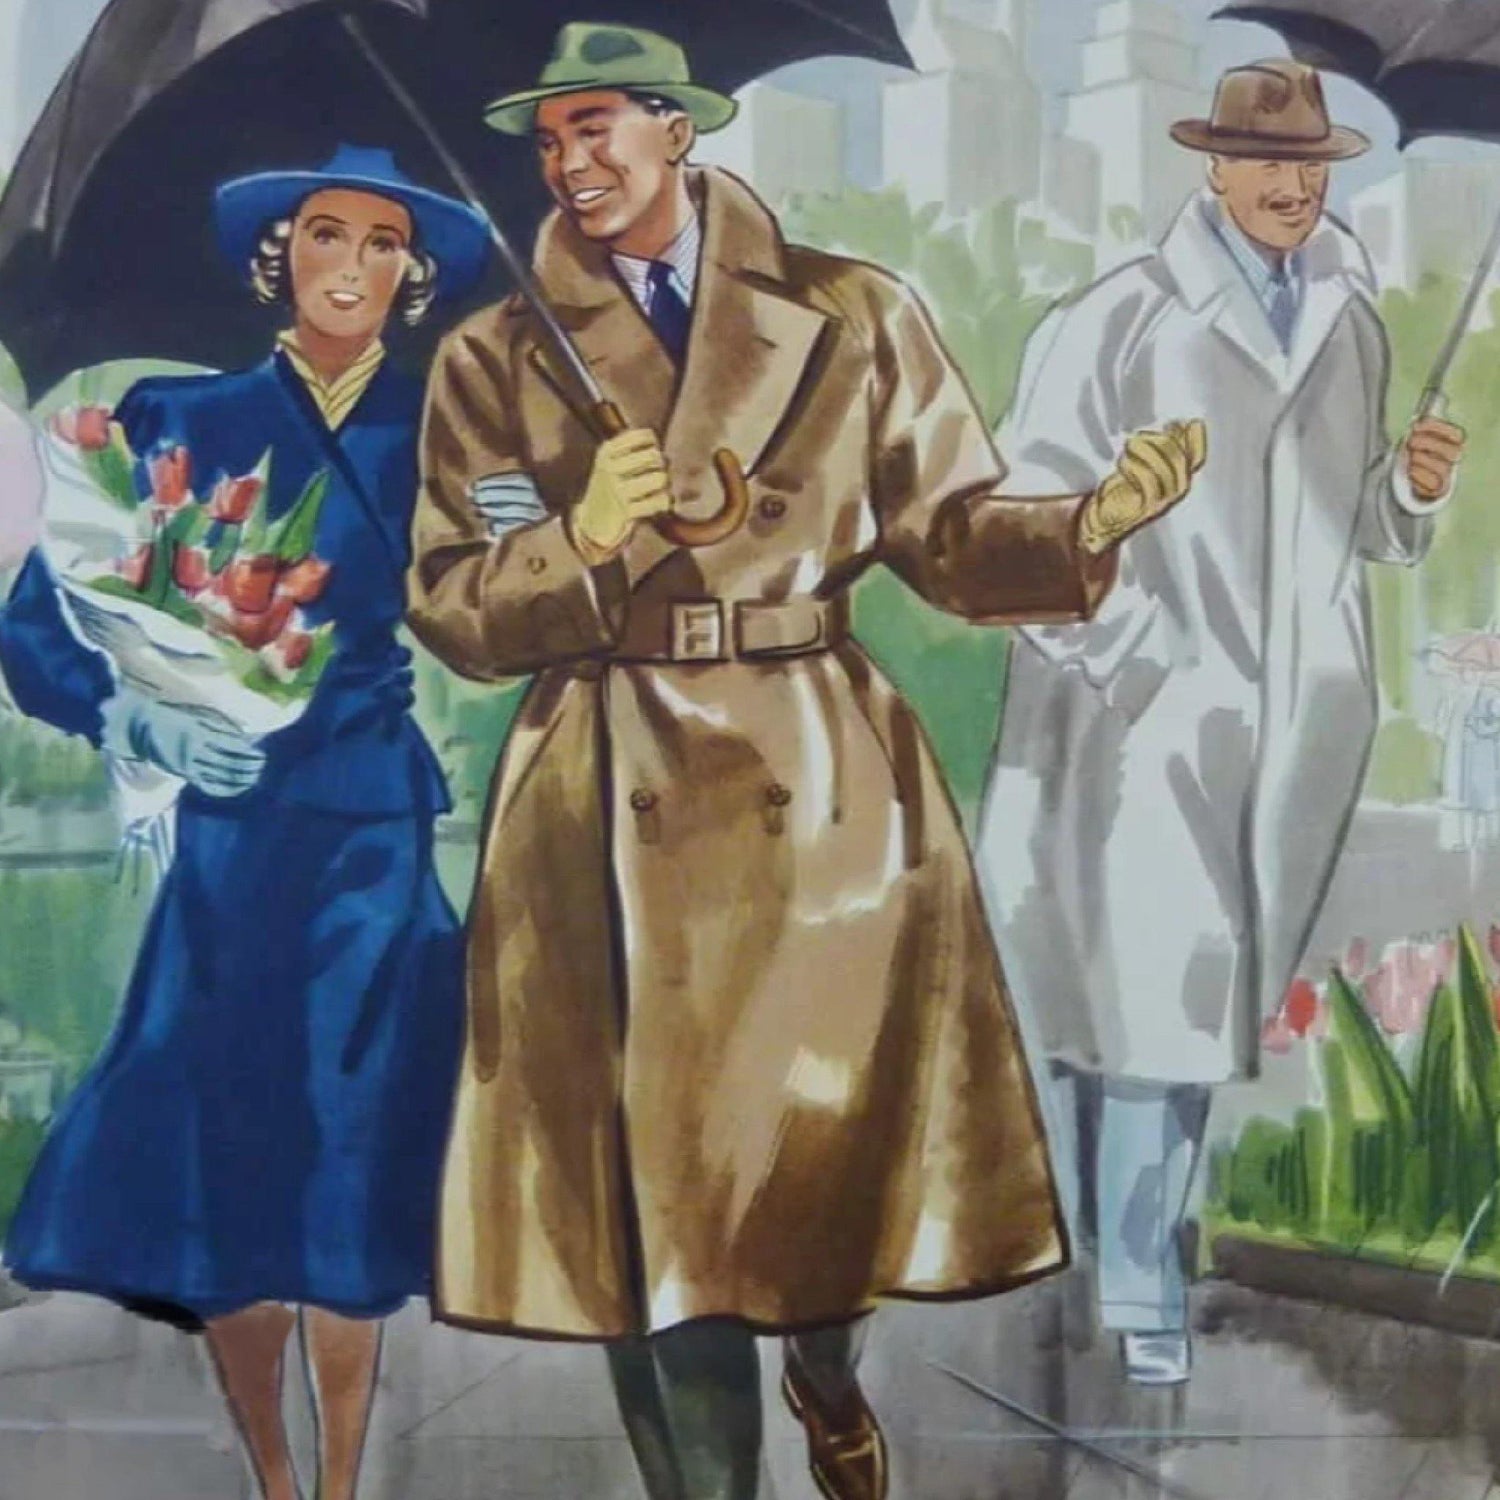 Man in brown overcoat centre holding a black umbrella and wearing a green trilby hat talking whilst being linked to a lady in a blue skirt suit and hat holding a bunch of tulips. A man in a light grey overcoat walks behind also carrying a black umbrella. A city can be seen in the distance.